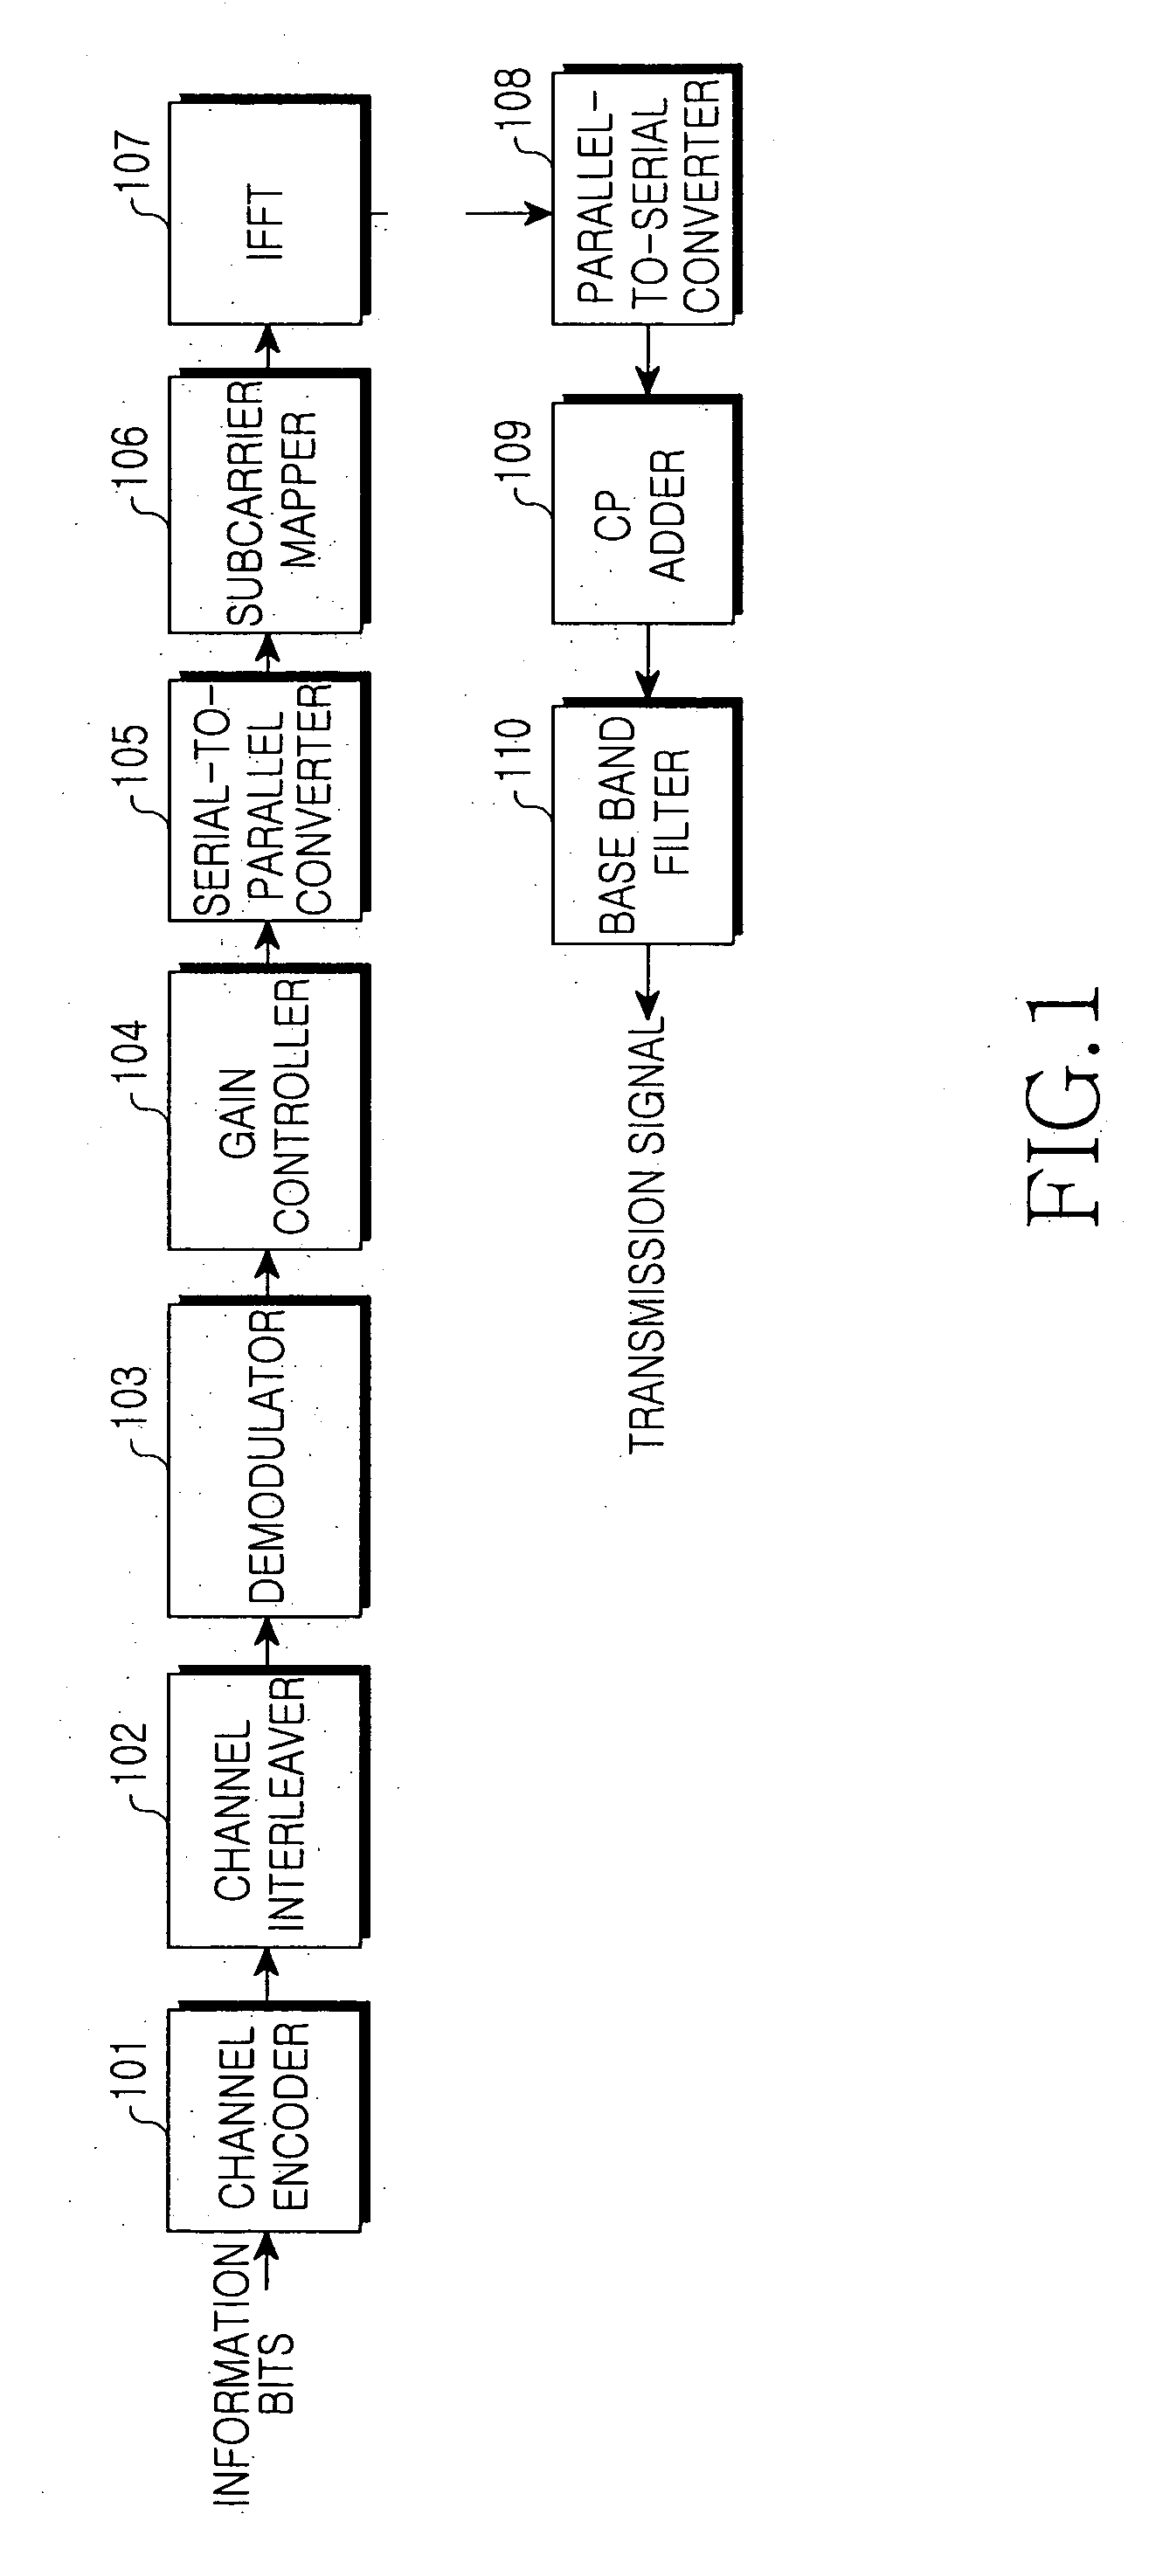 Apparatus and method for channel selective scheduling in mobile communication systems using OFDMA